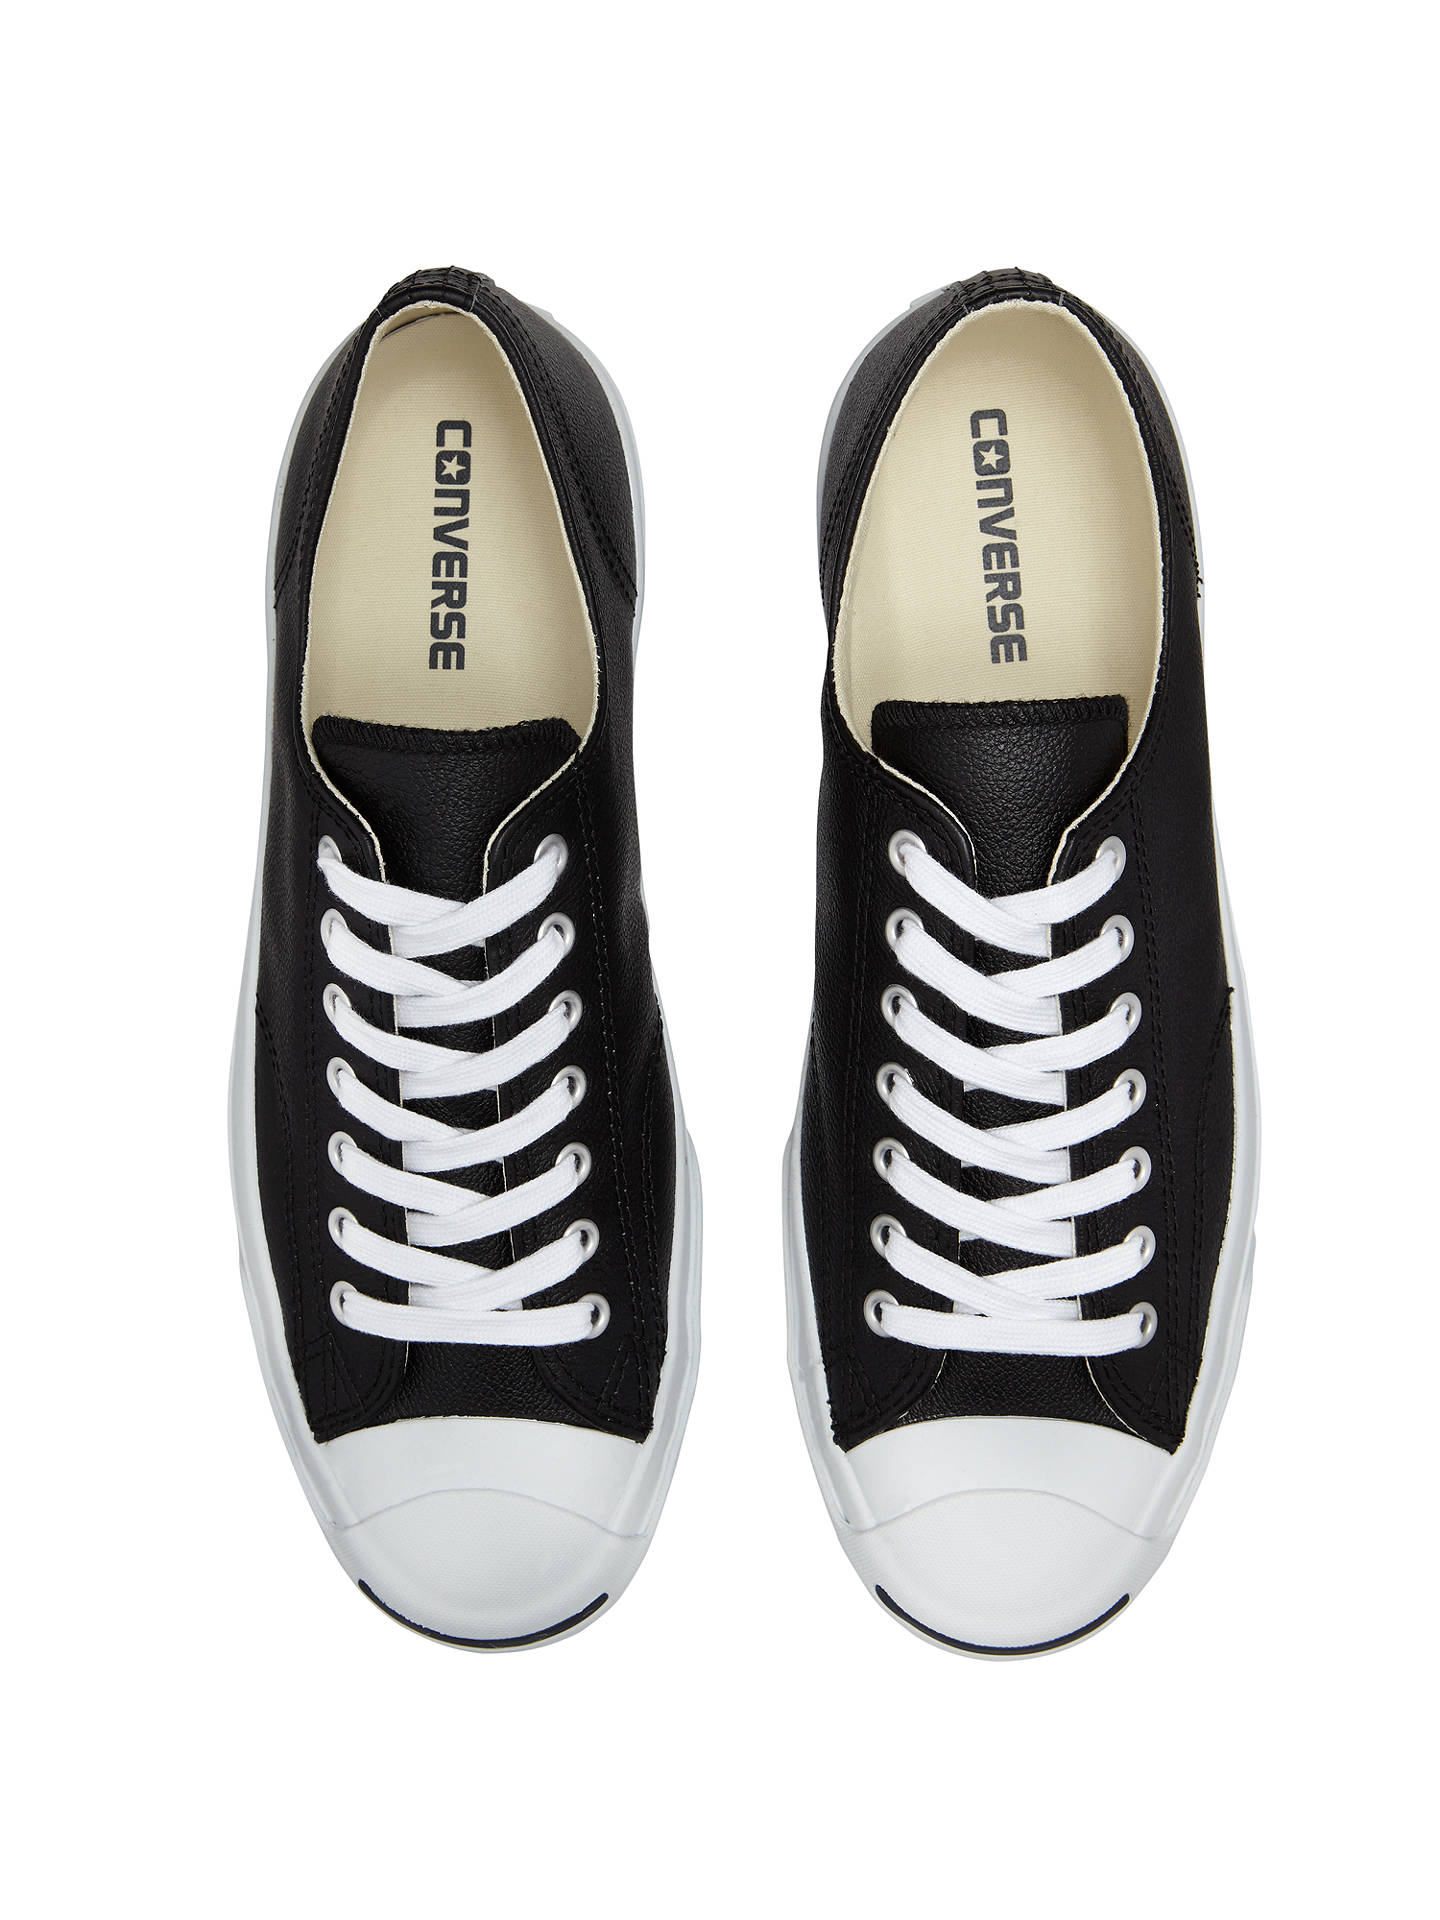 Converse Jack Purcell Lace-Up Leather Trainers at John Lewis & Partners